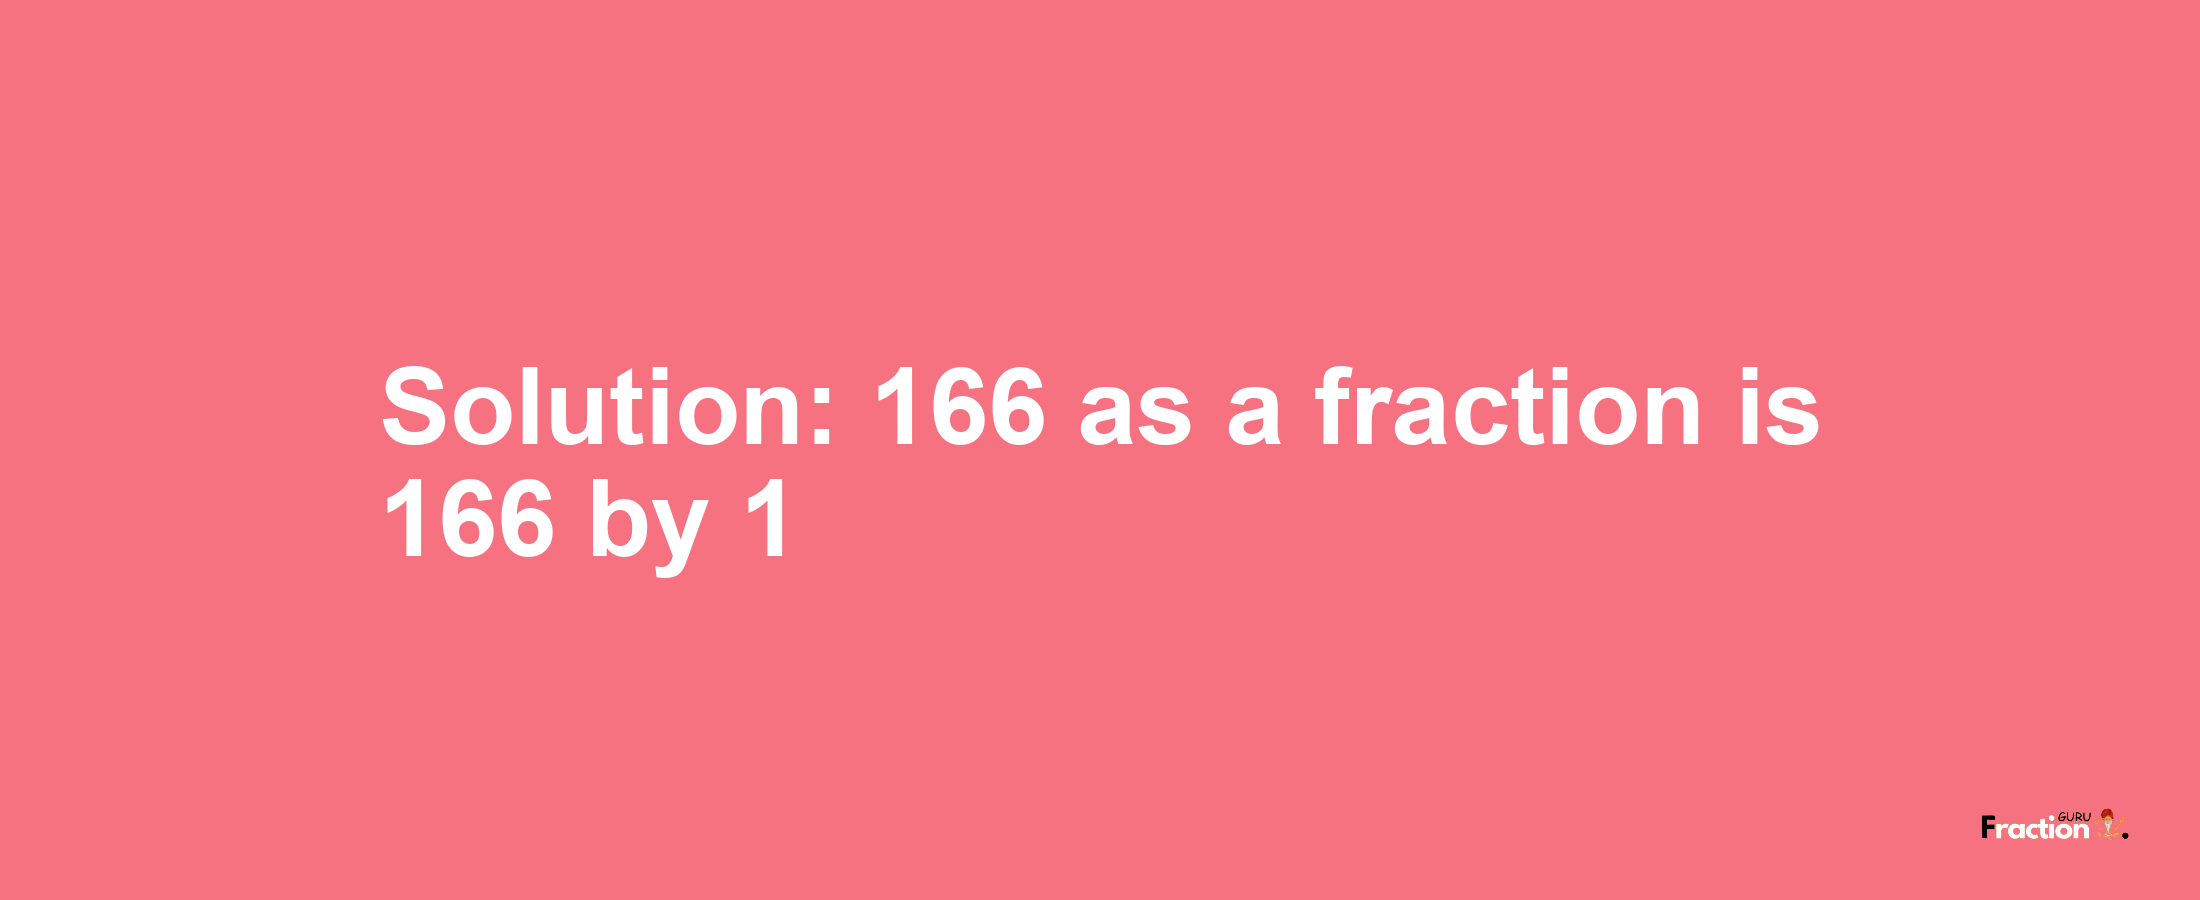 Solution:166 as a fraction is 166/1